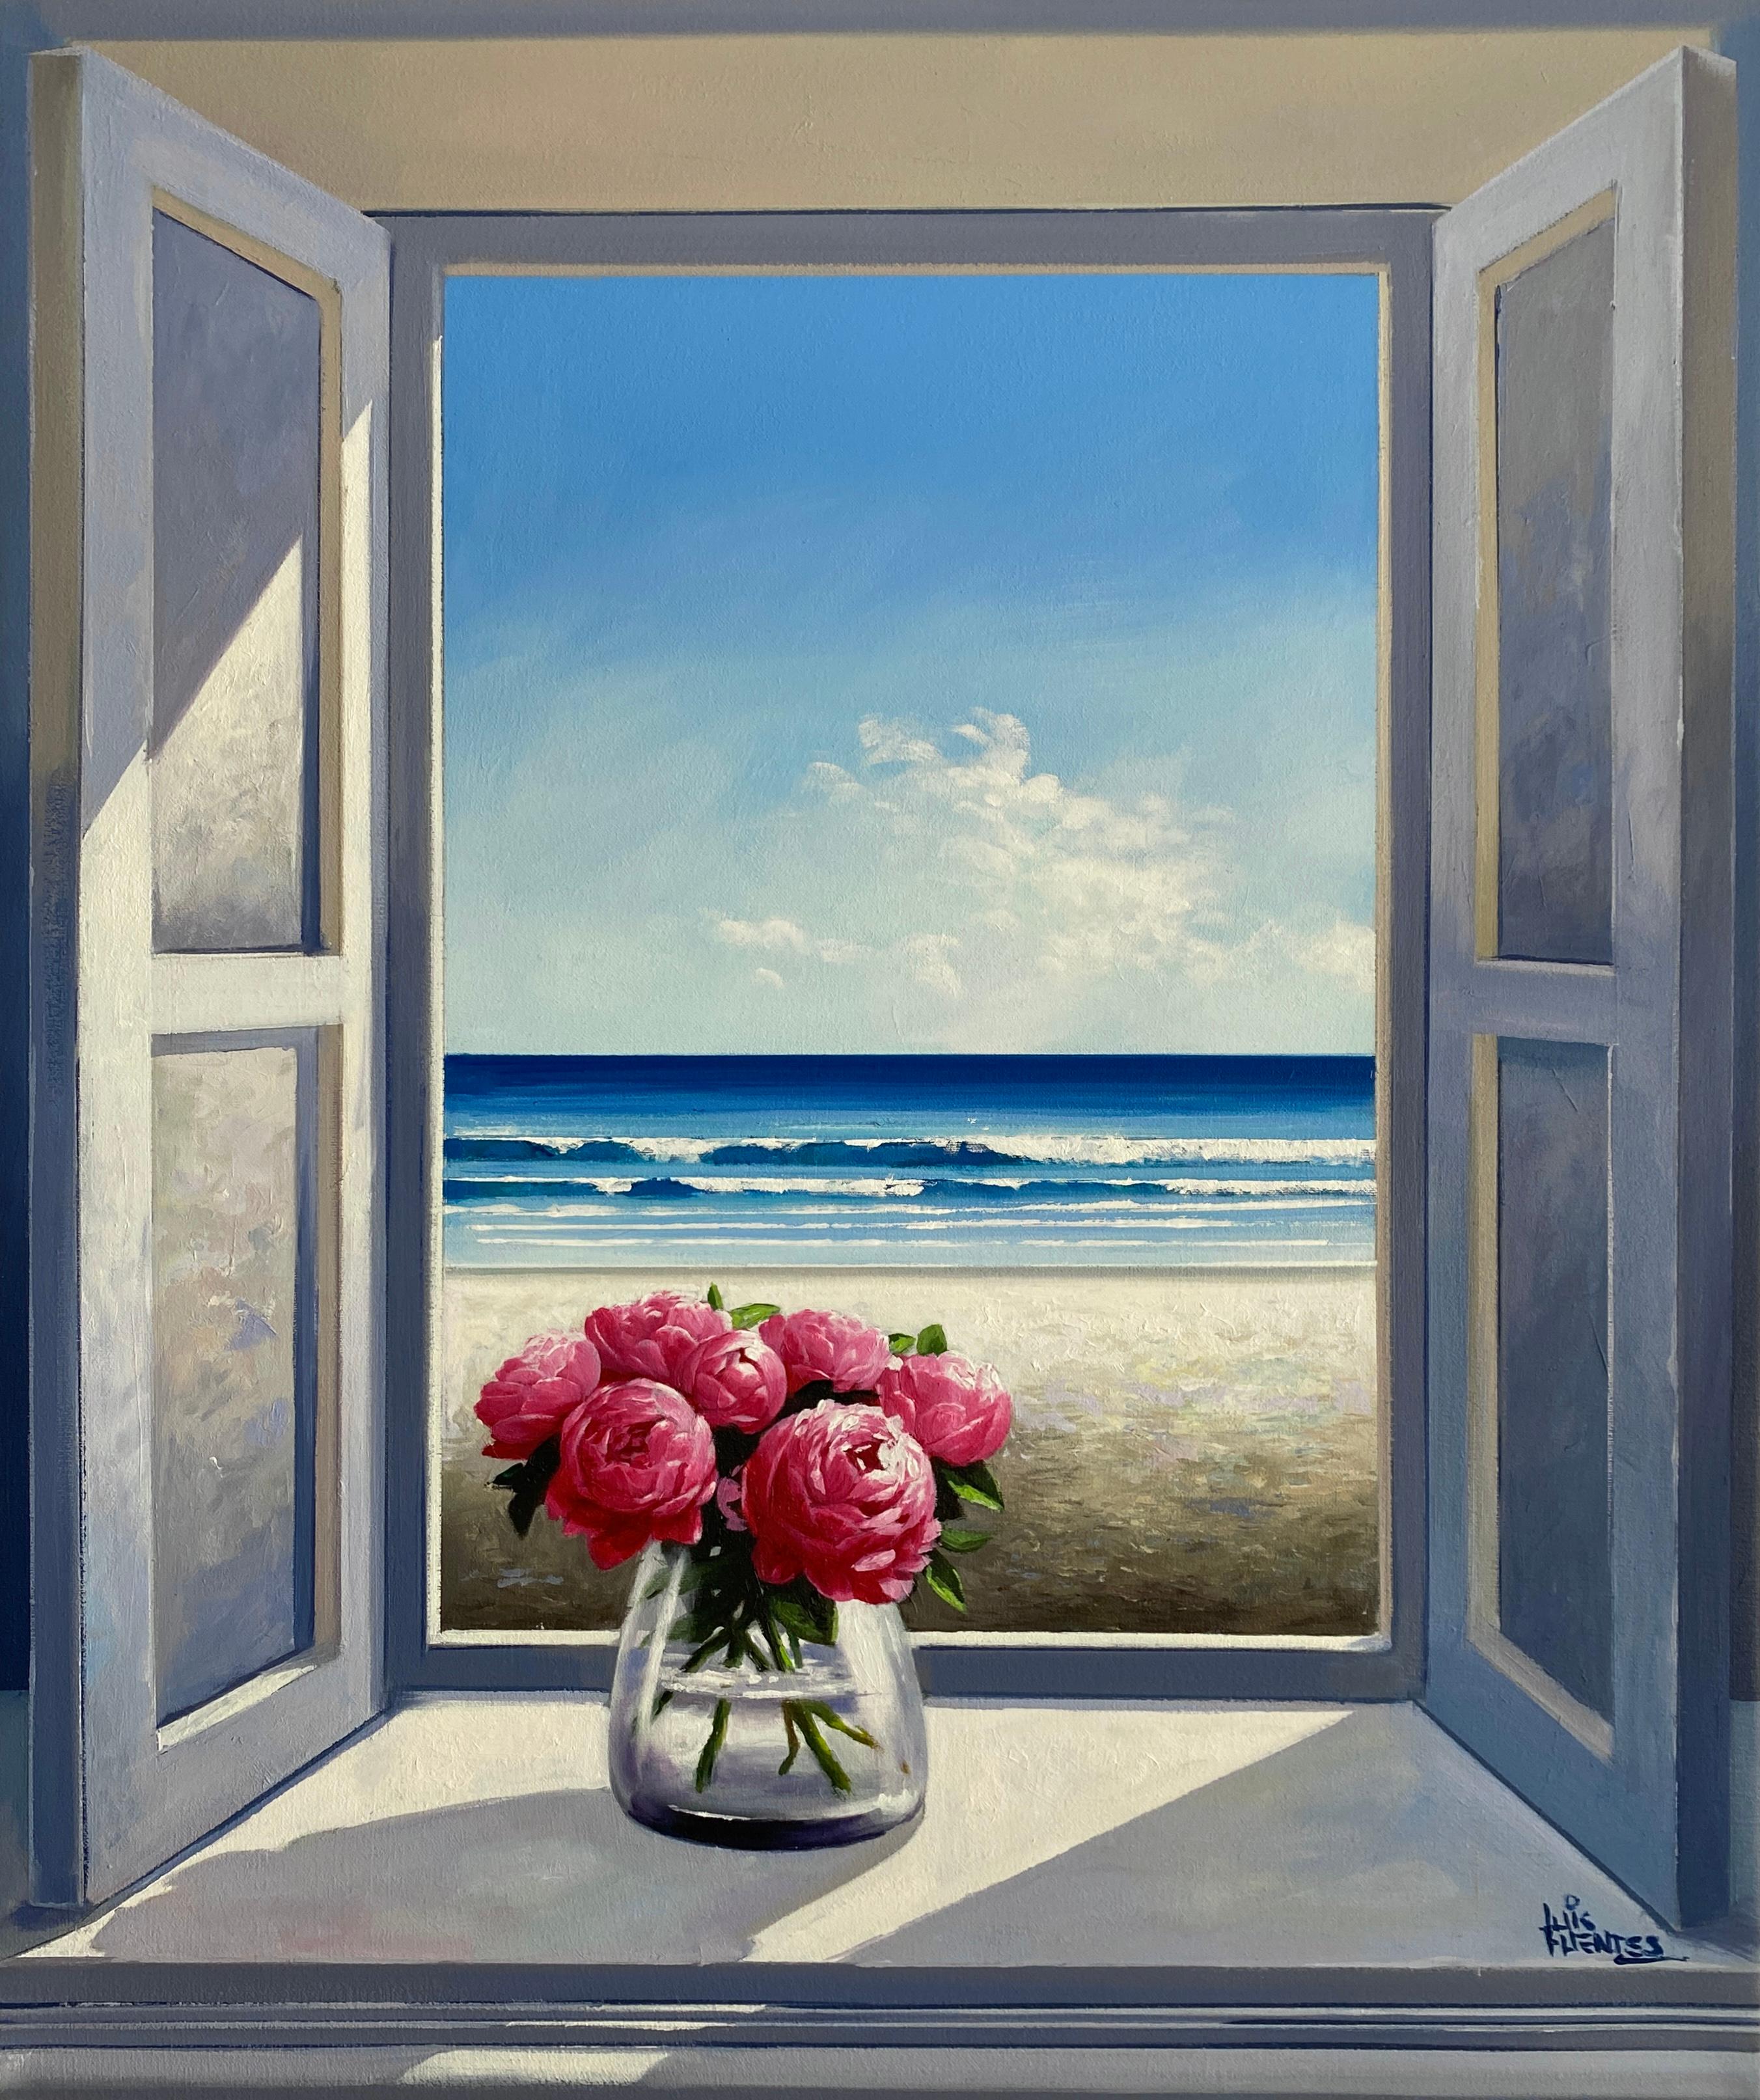 Luis Fuentes Landscape Painting - Peonies and the sea - Original seascape - Oil painting